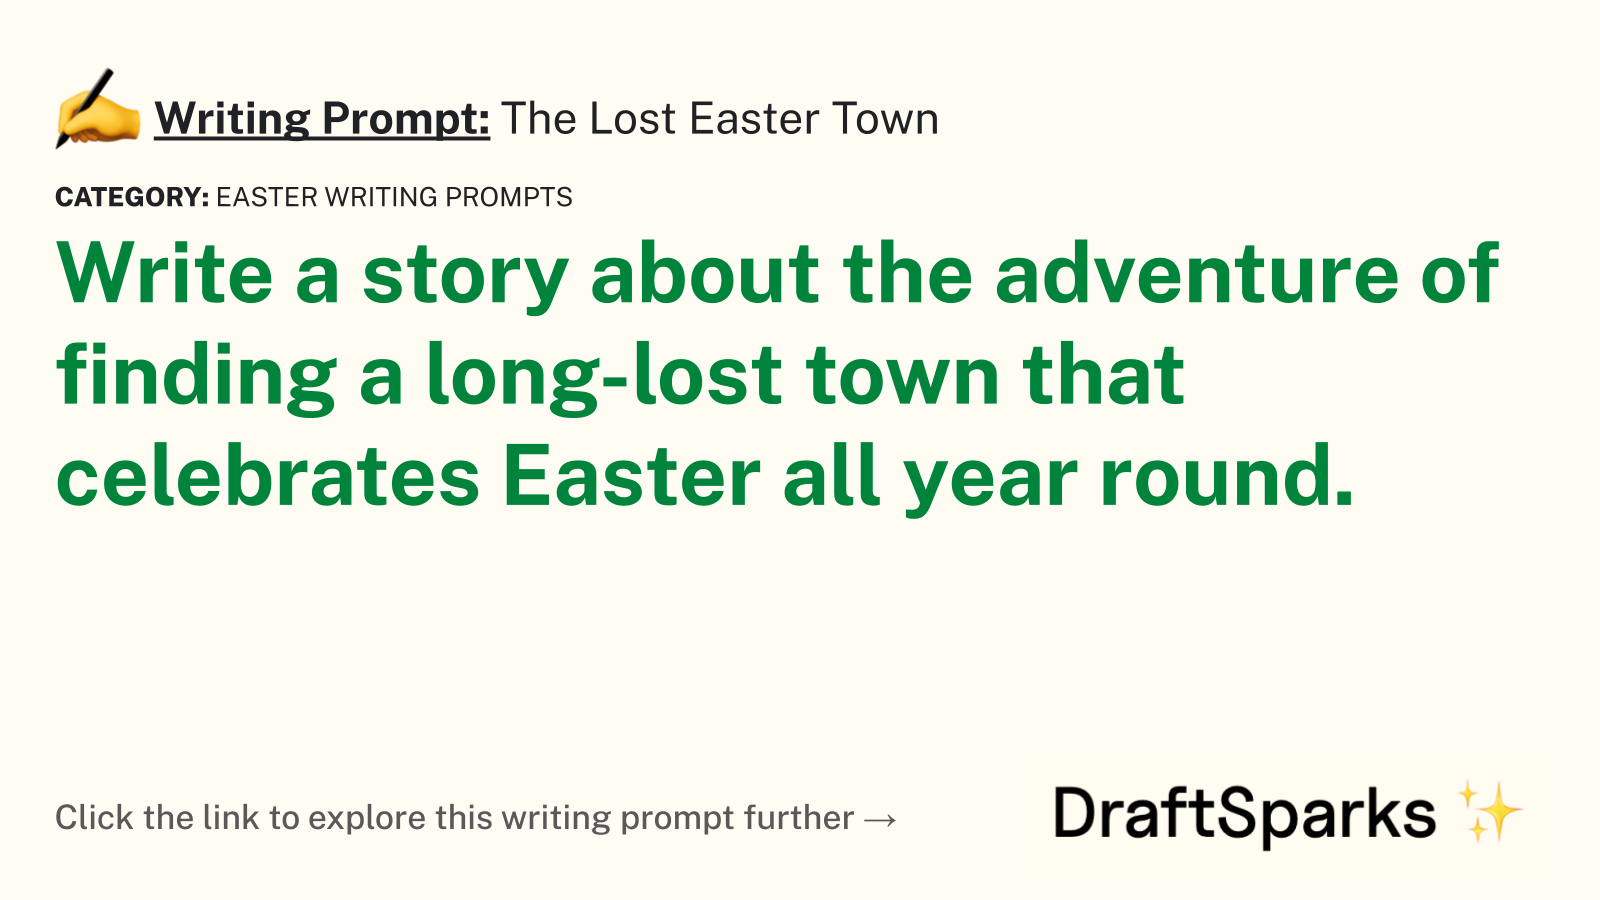 The Lost Easter Town